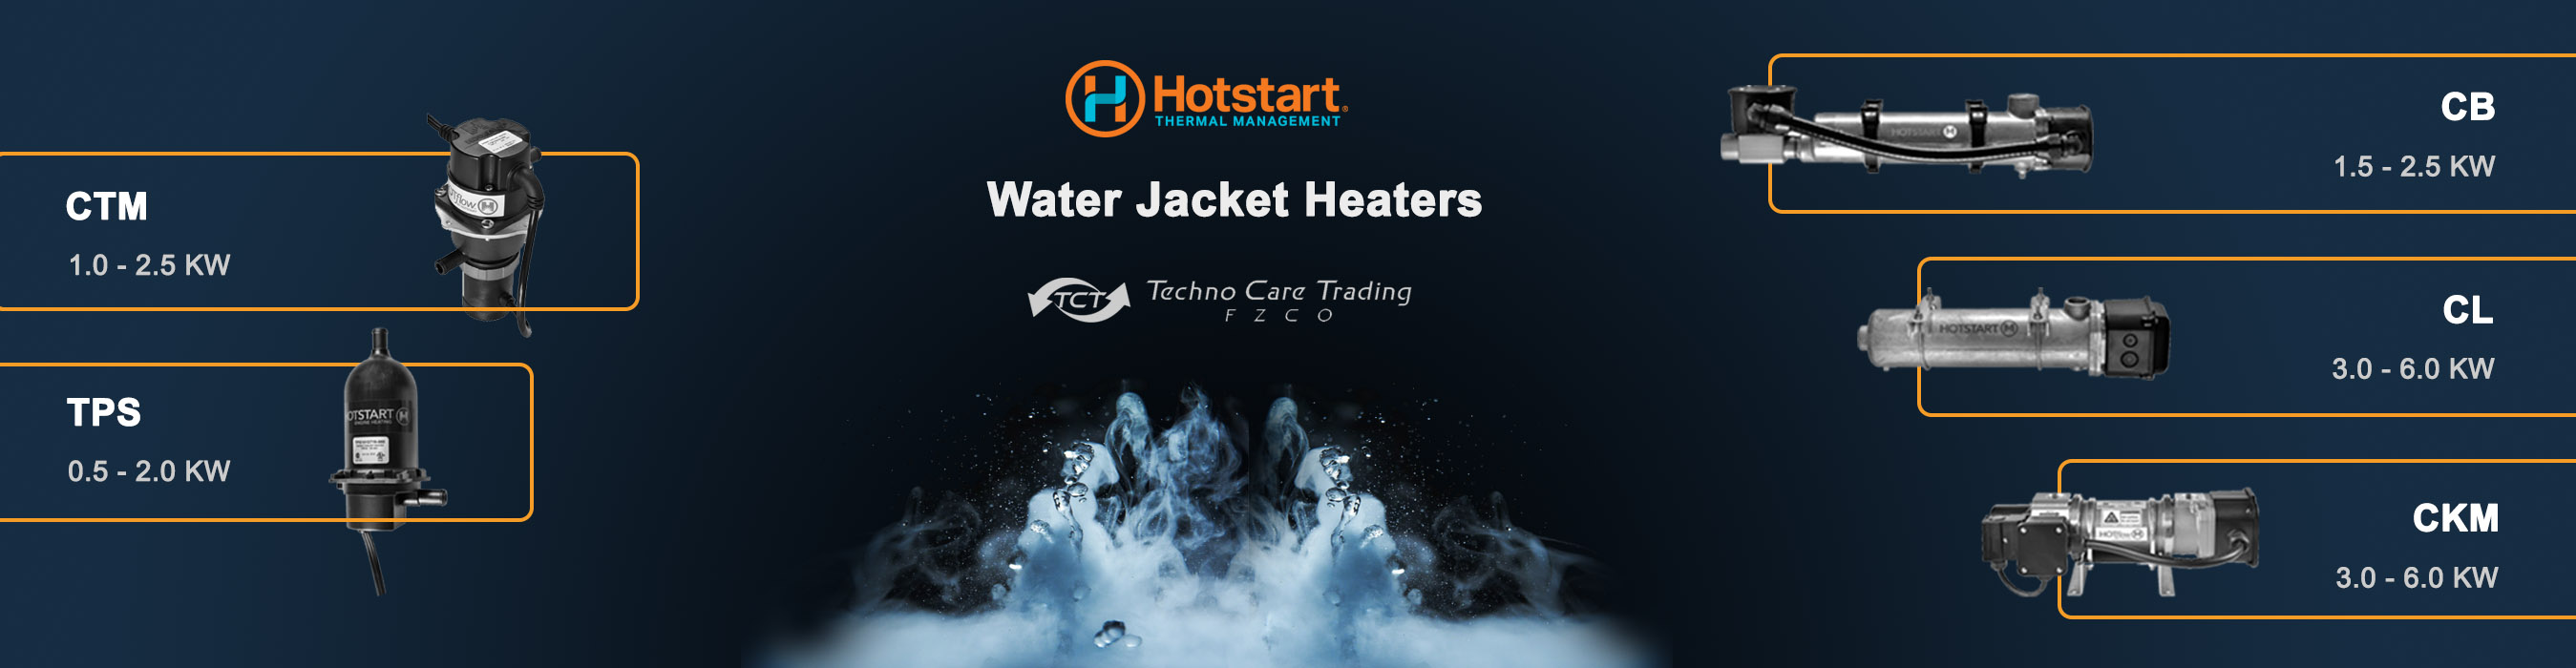 Banner Hotstart - Products